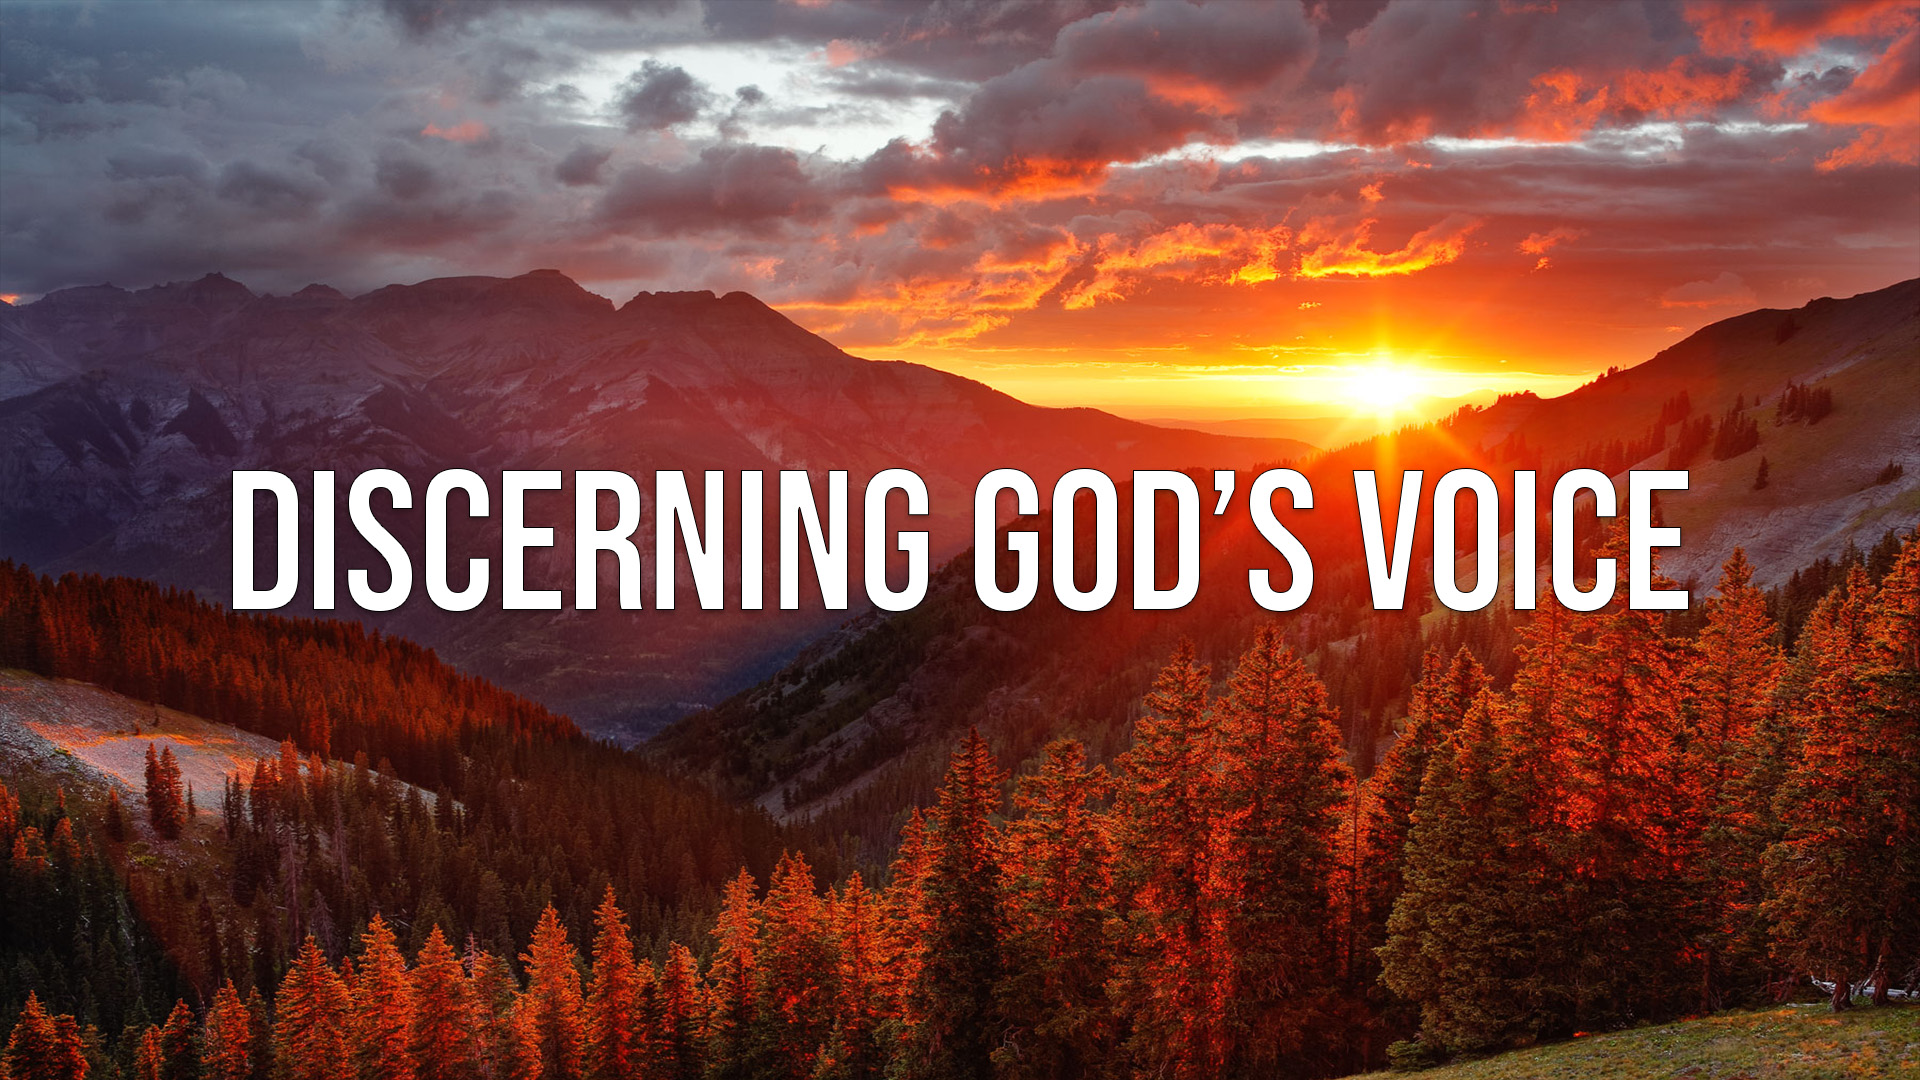 Discerning God's Voice Together - God Speaks to Us Personally